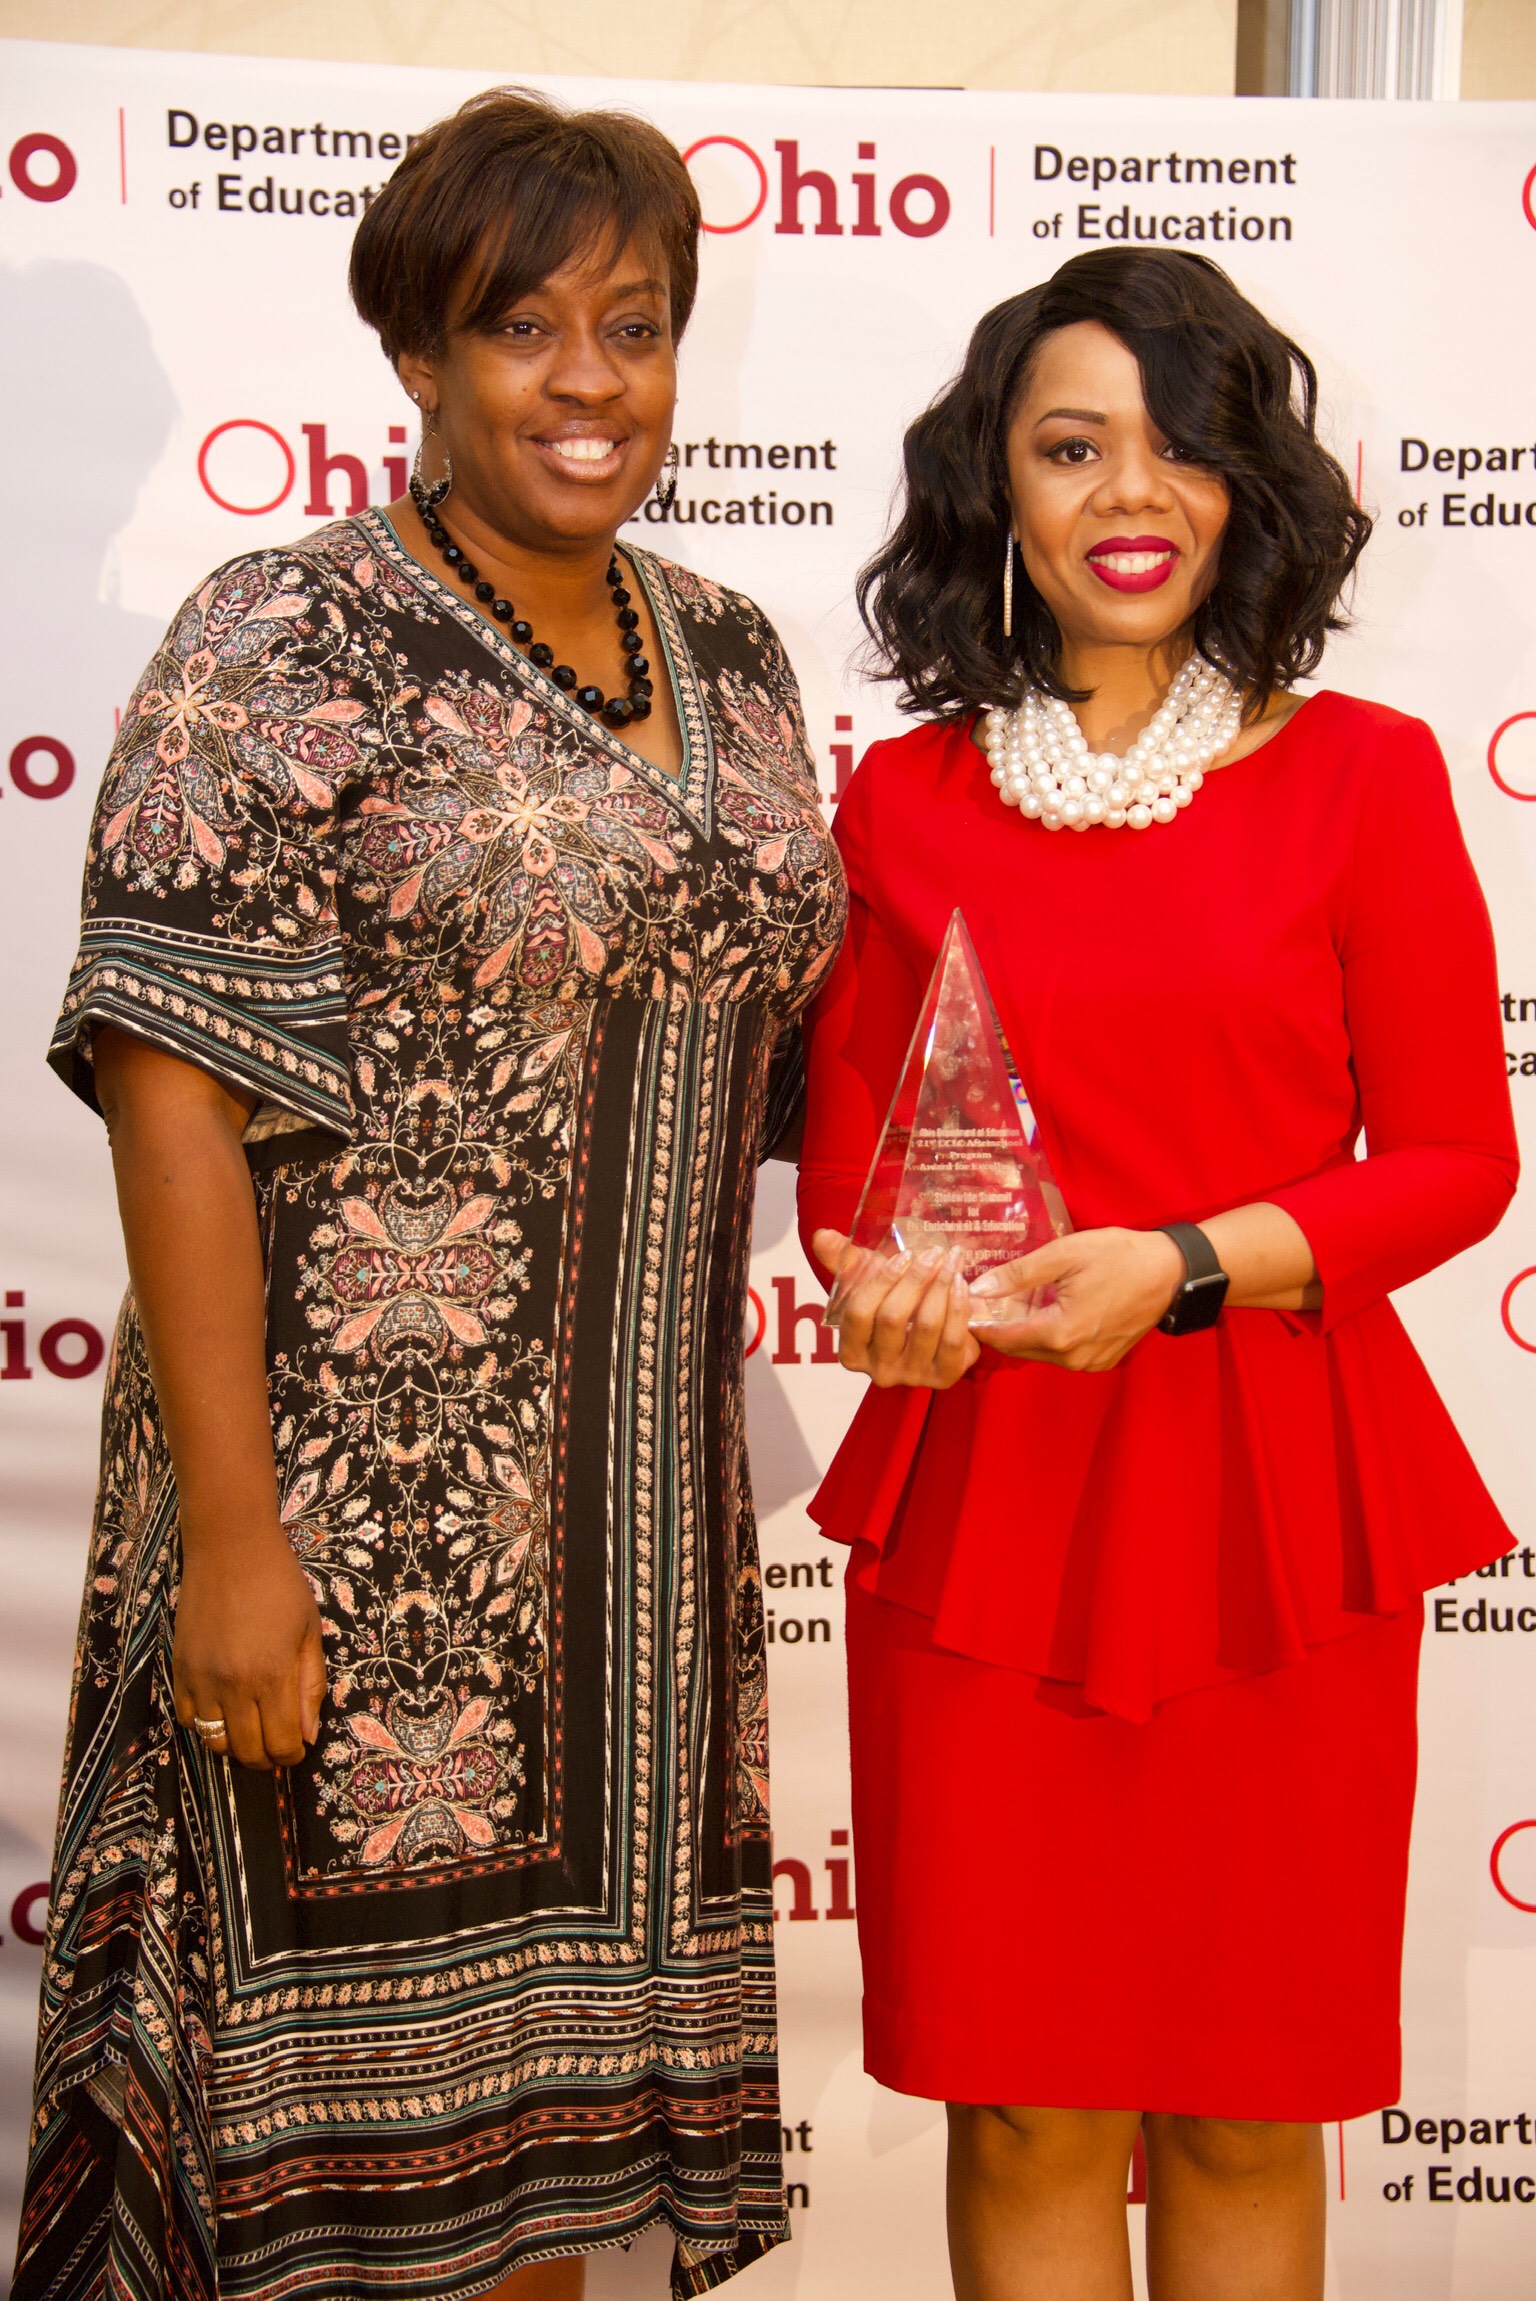 CHFS Wins Award from Ohio Dept of Education